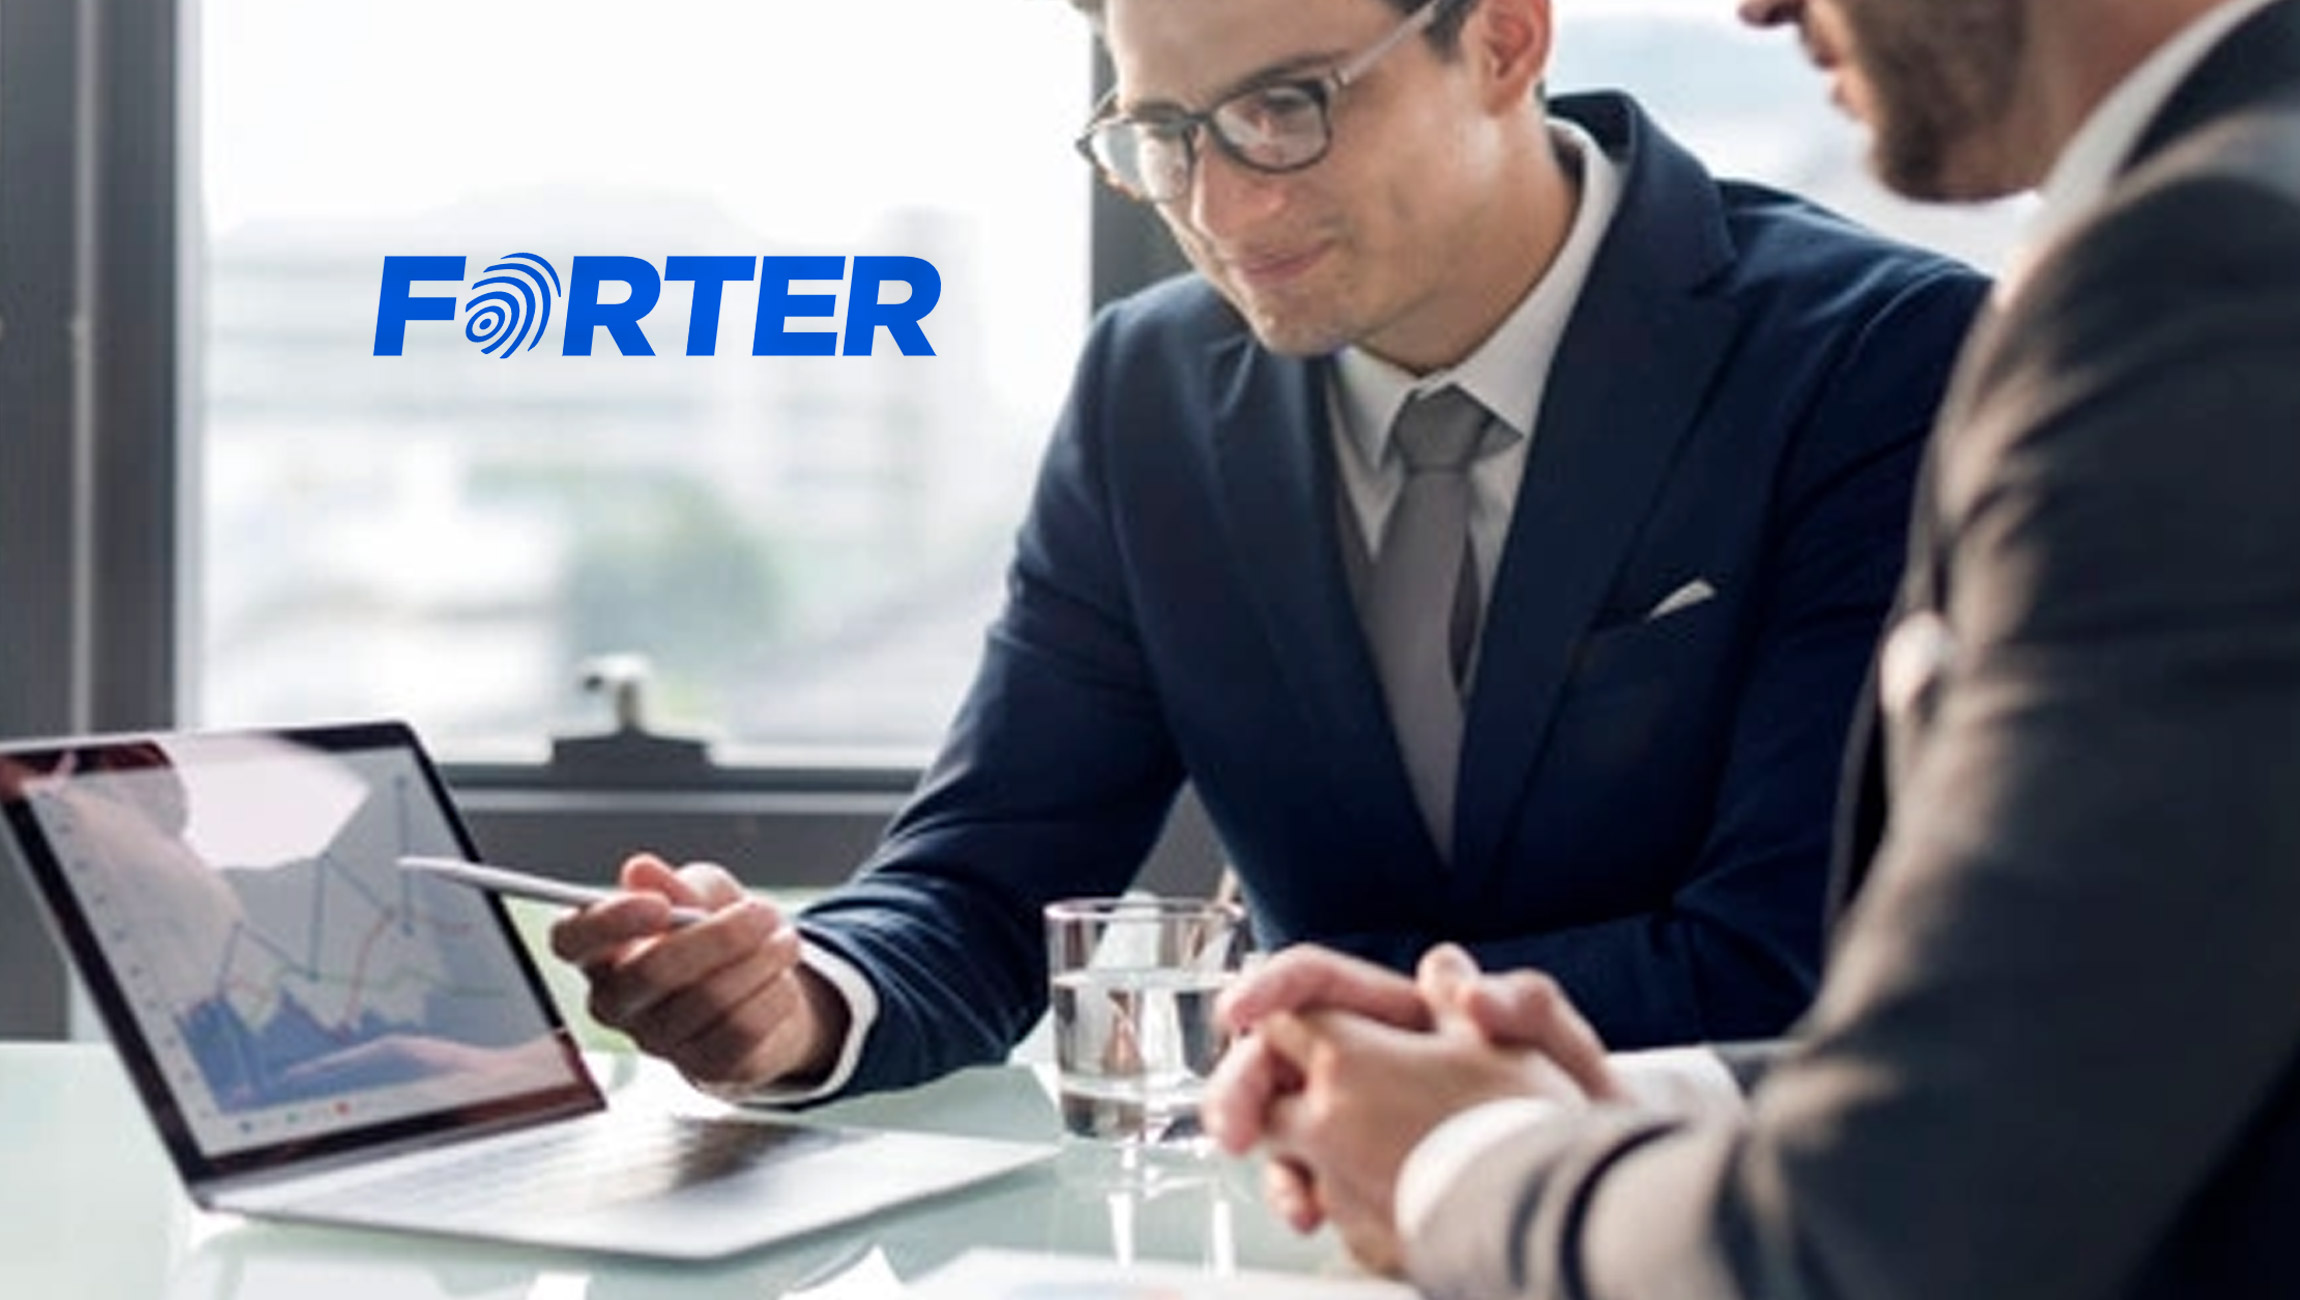 Forter Joins Shopify Plus Certified App Program to Provide Industry-Leading Fraud Prevention to the World's Biggest Brands